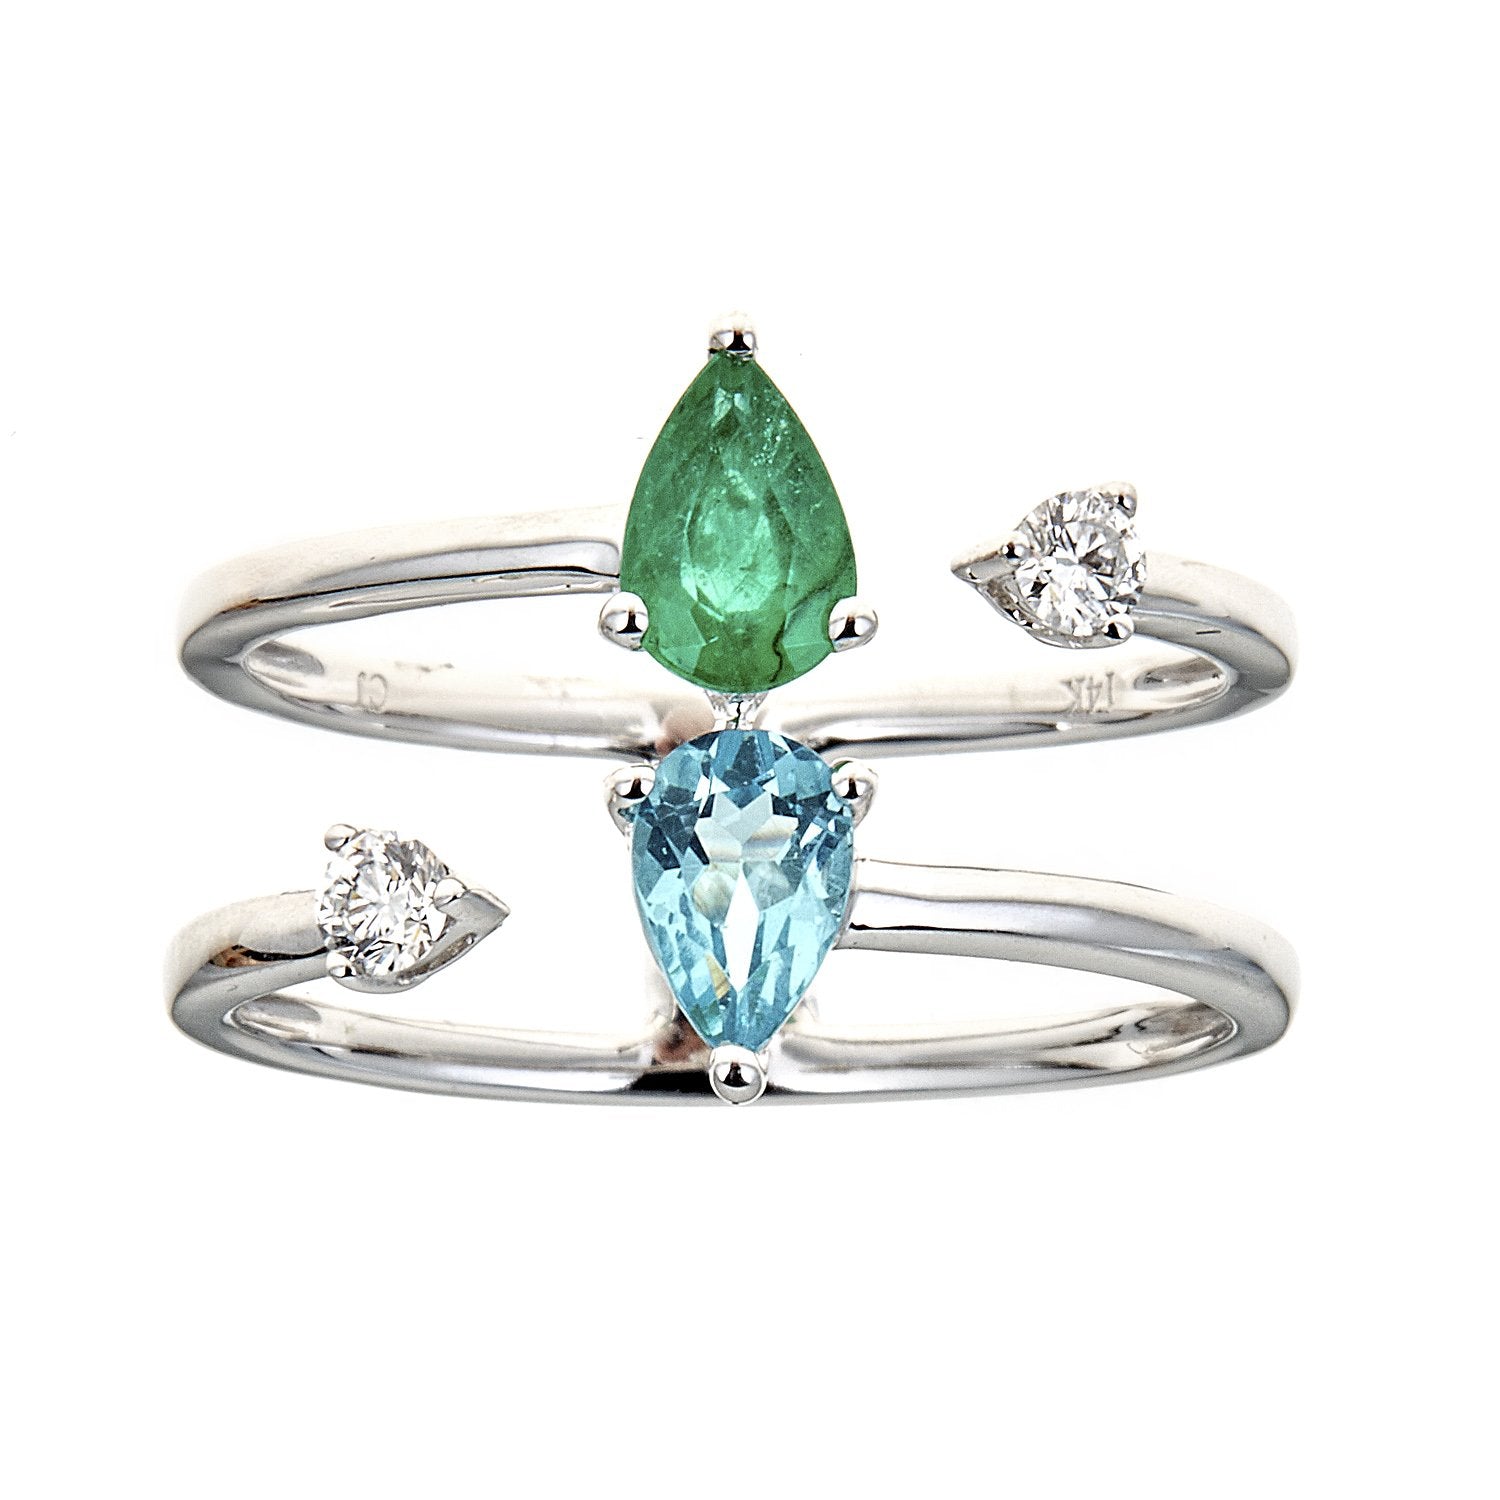 14K White Gold Emerald, Apatite and Diamond Ring by Anika and August 1